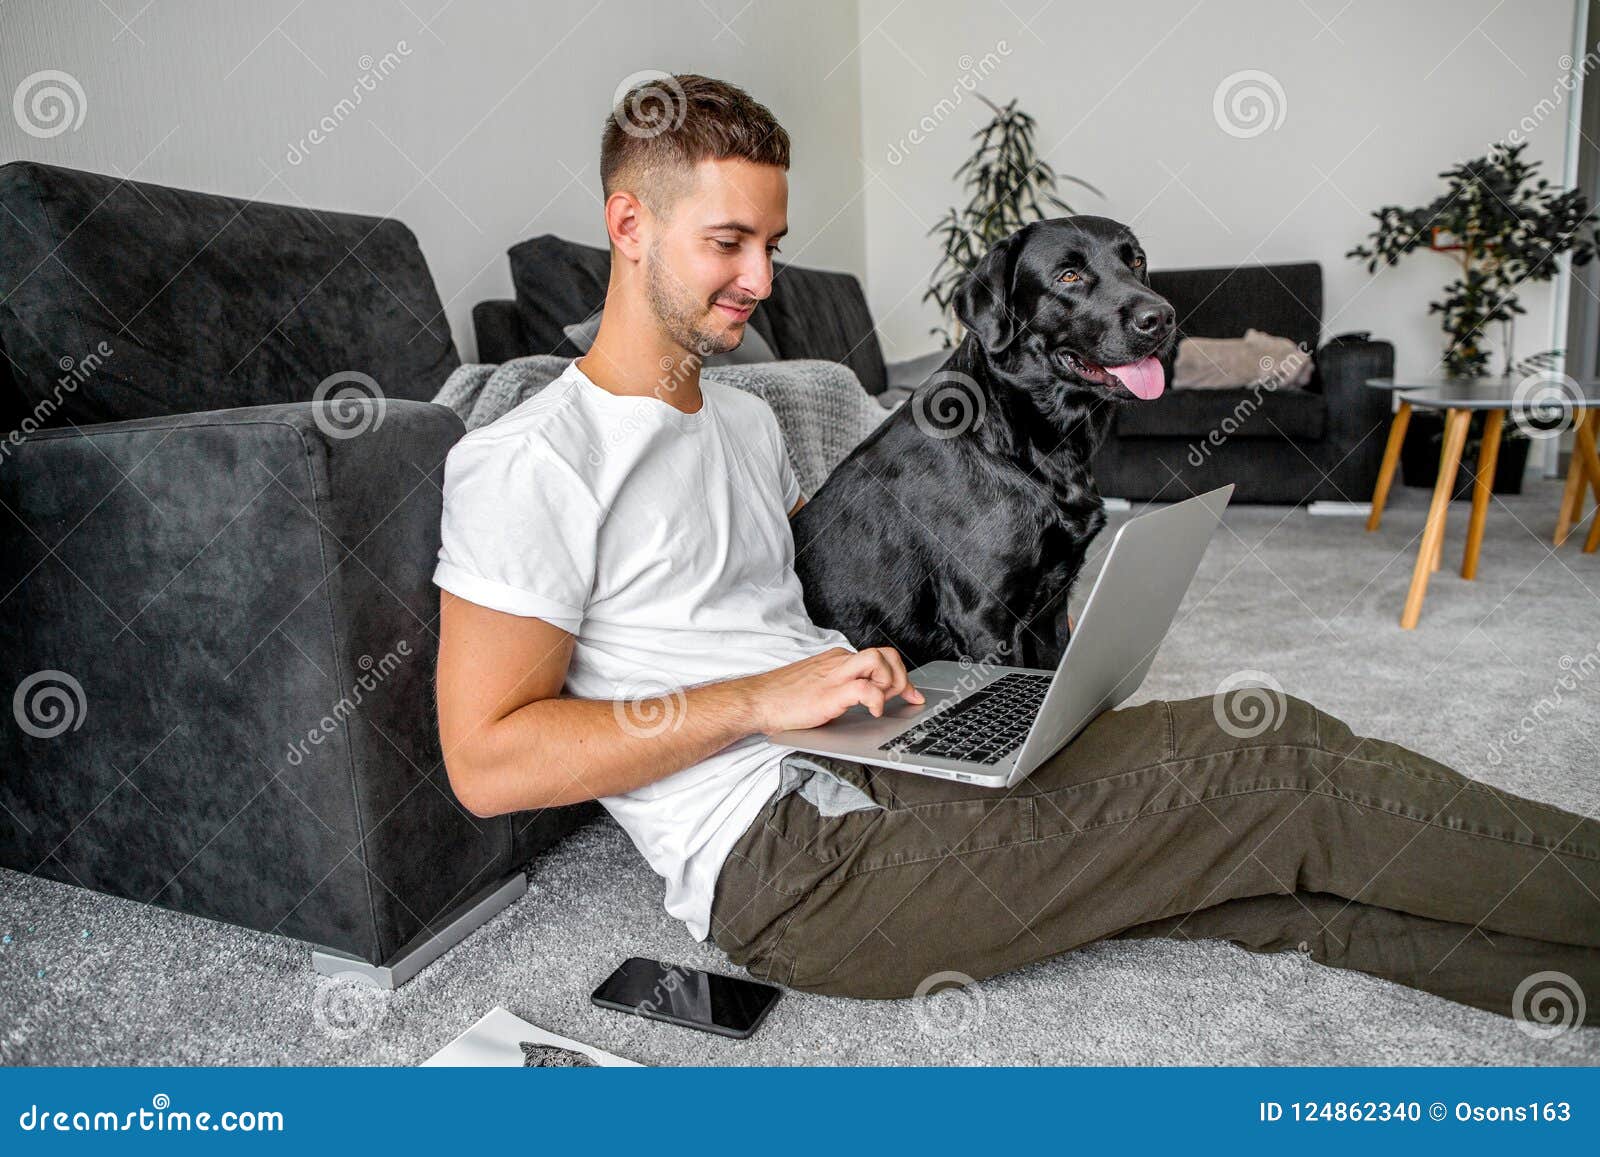 freelancer guy sitting at home working in laptop and with dog in